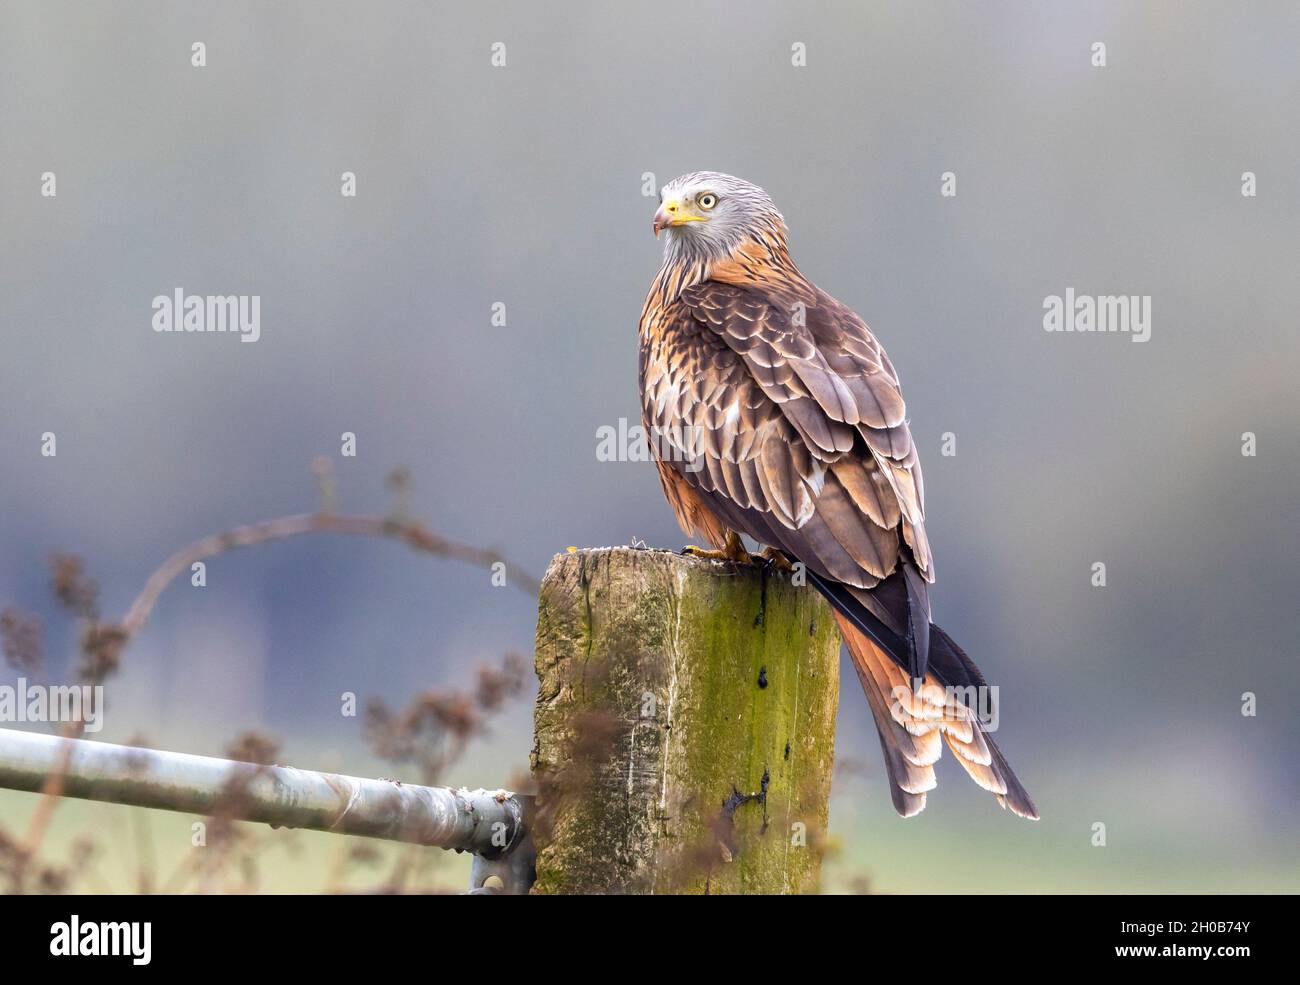 Red kite (Milvus milvus) perched on a post, England Stock Photo